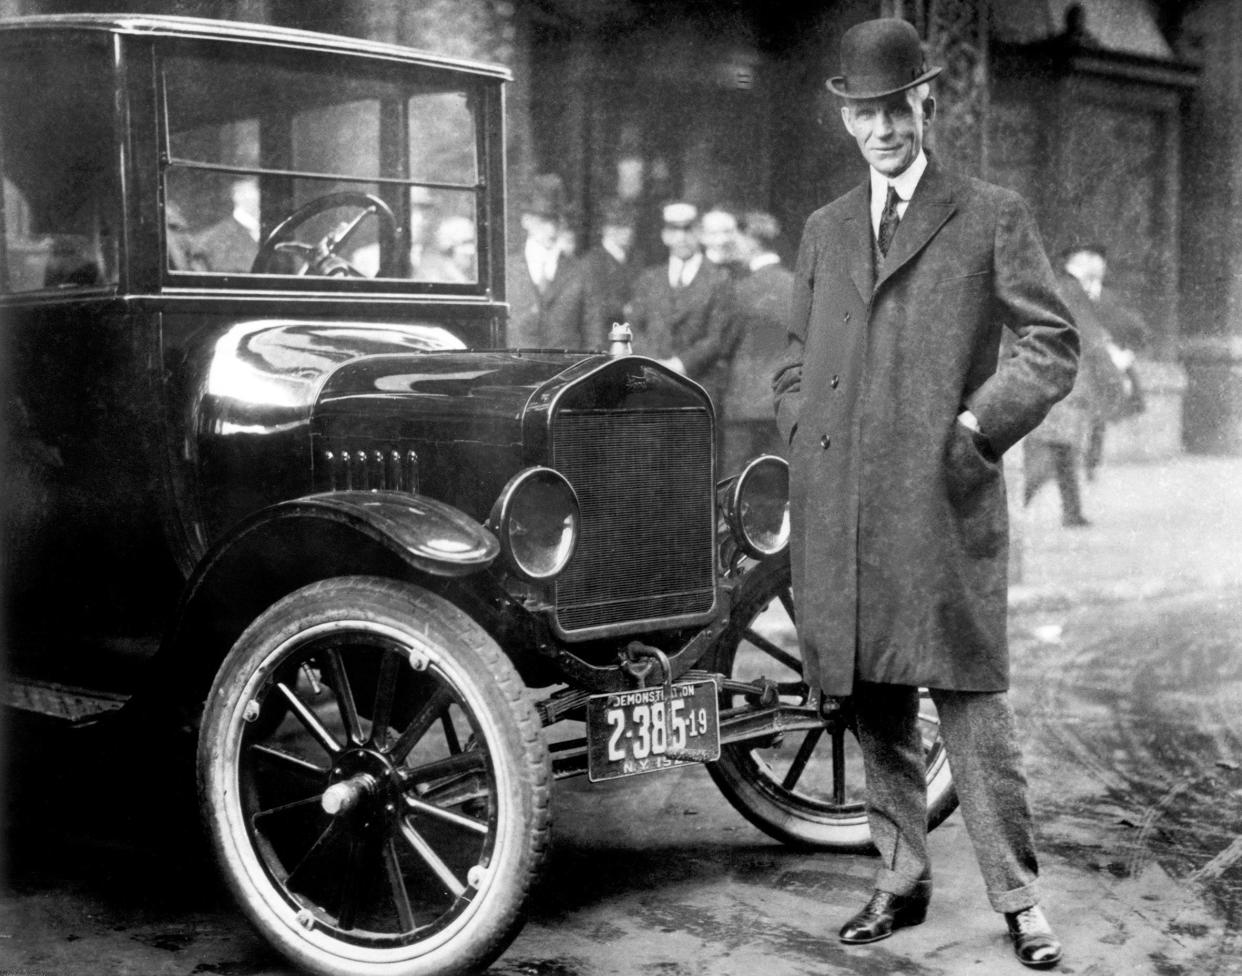 While other auto makers wanted to design luxury cars Henry Ford designed a car that anyone could afford. Here he is standing by that very car. From the collections of The Henry Ford and Ford Motor Company.